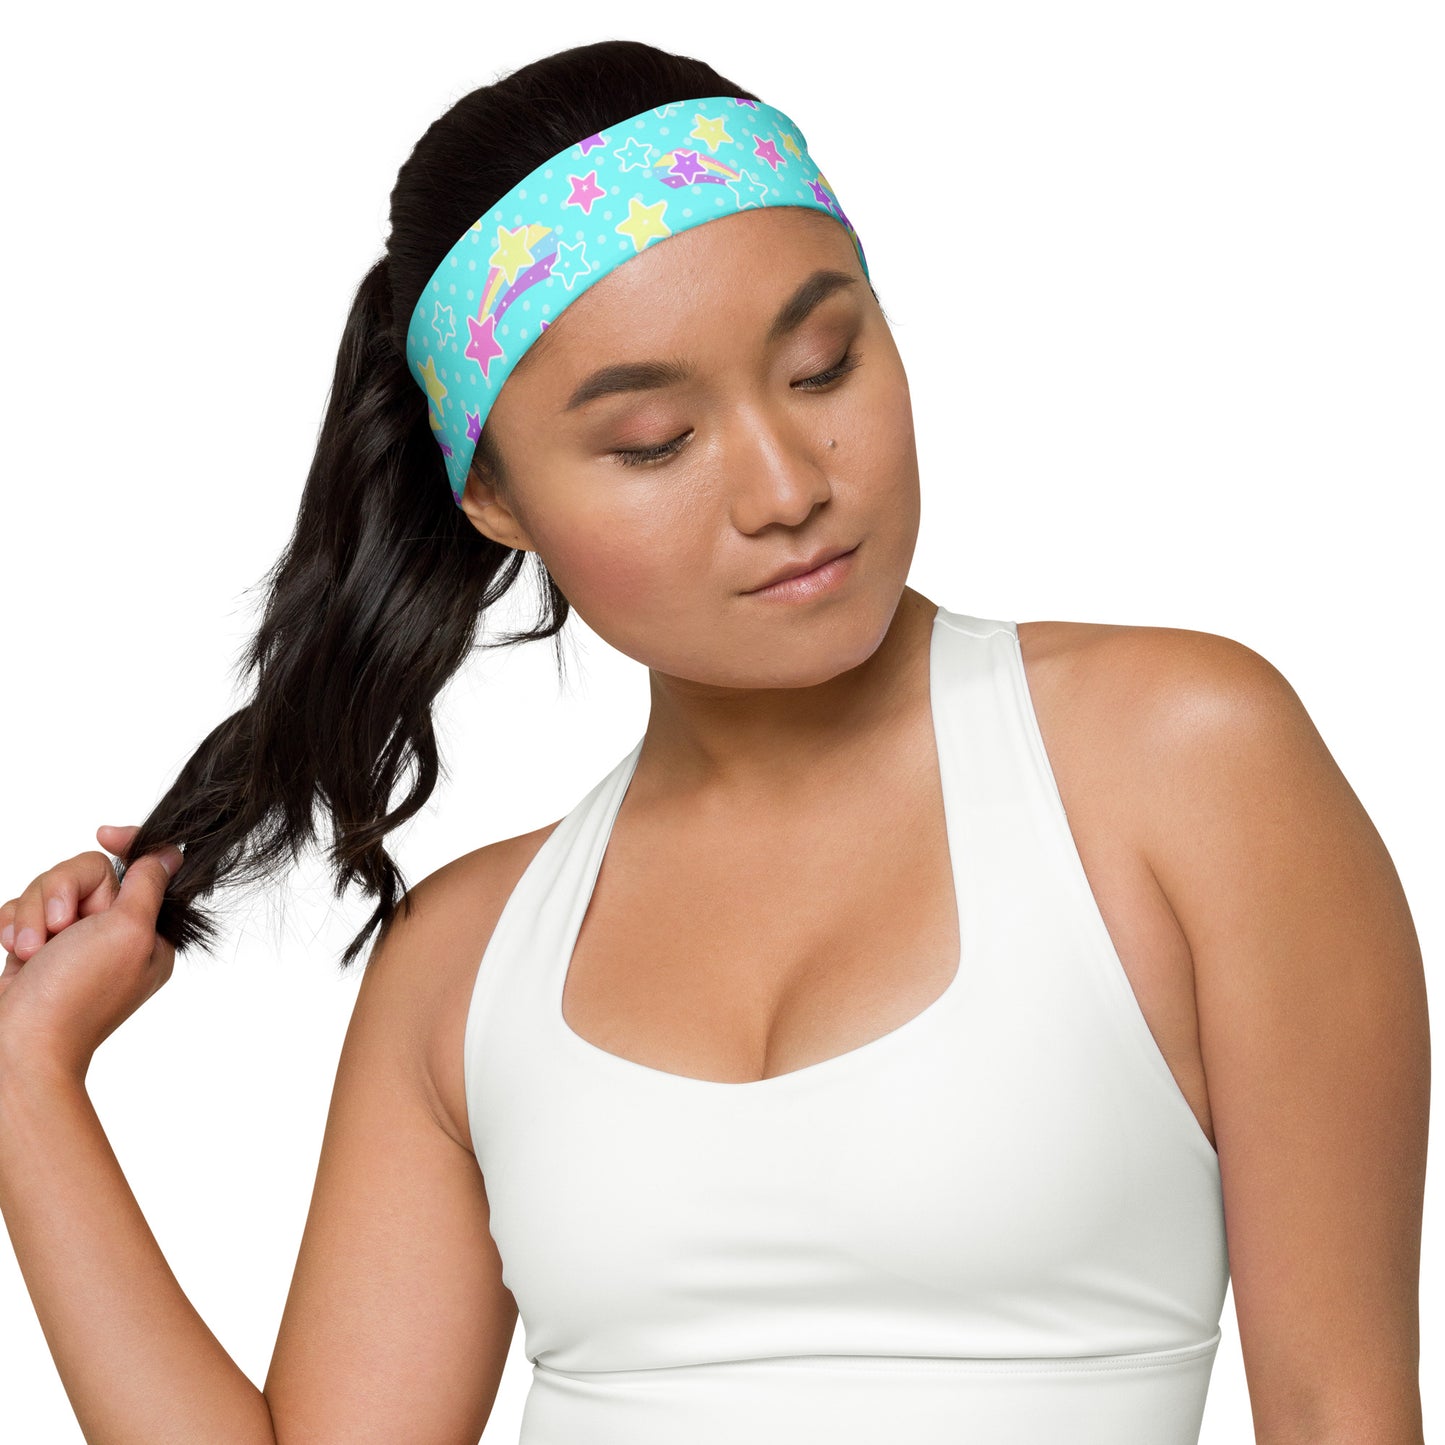 Starry Party Blue Stretchable Headband